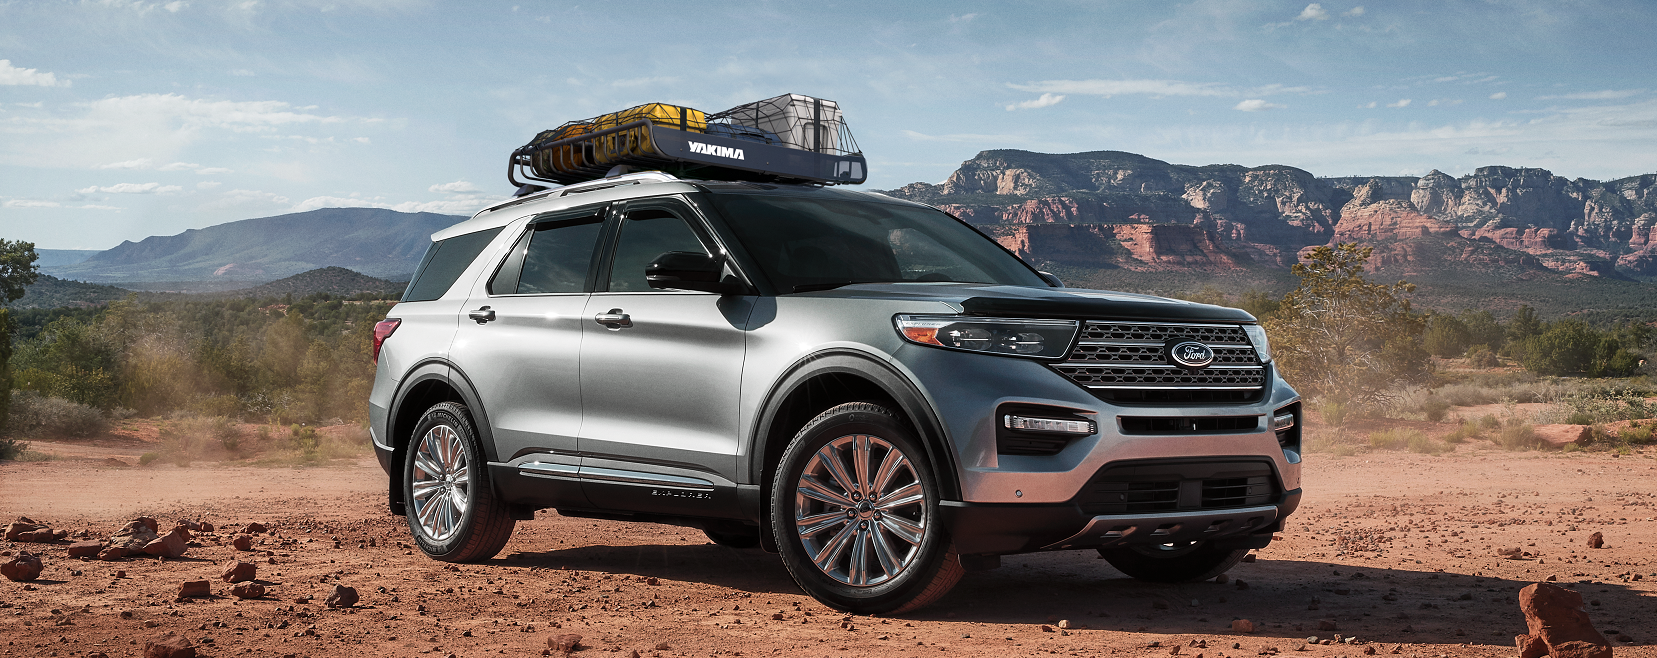 A new gray 2021 Ford Explorer with a roof rack filled with luggage in the dessert with brush and mountains pictured in the distance.